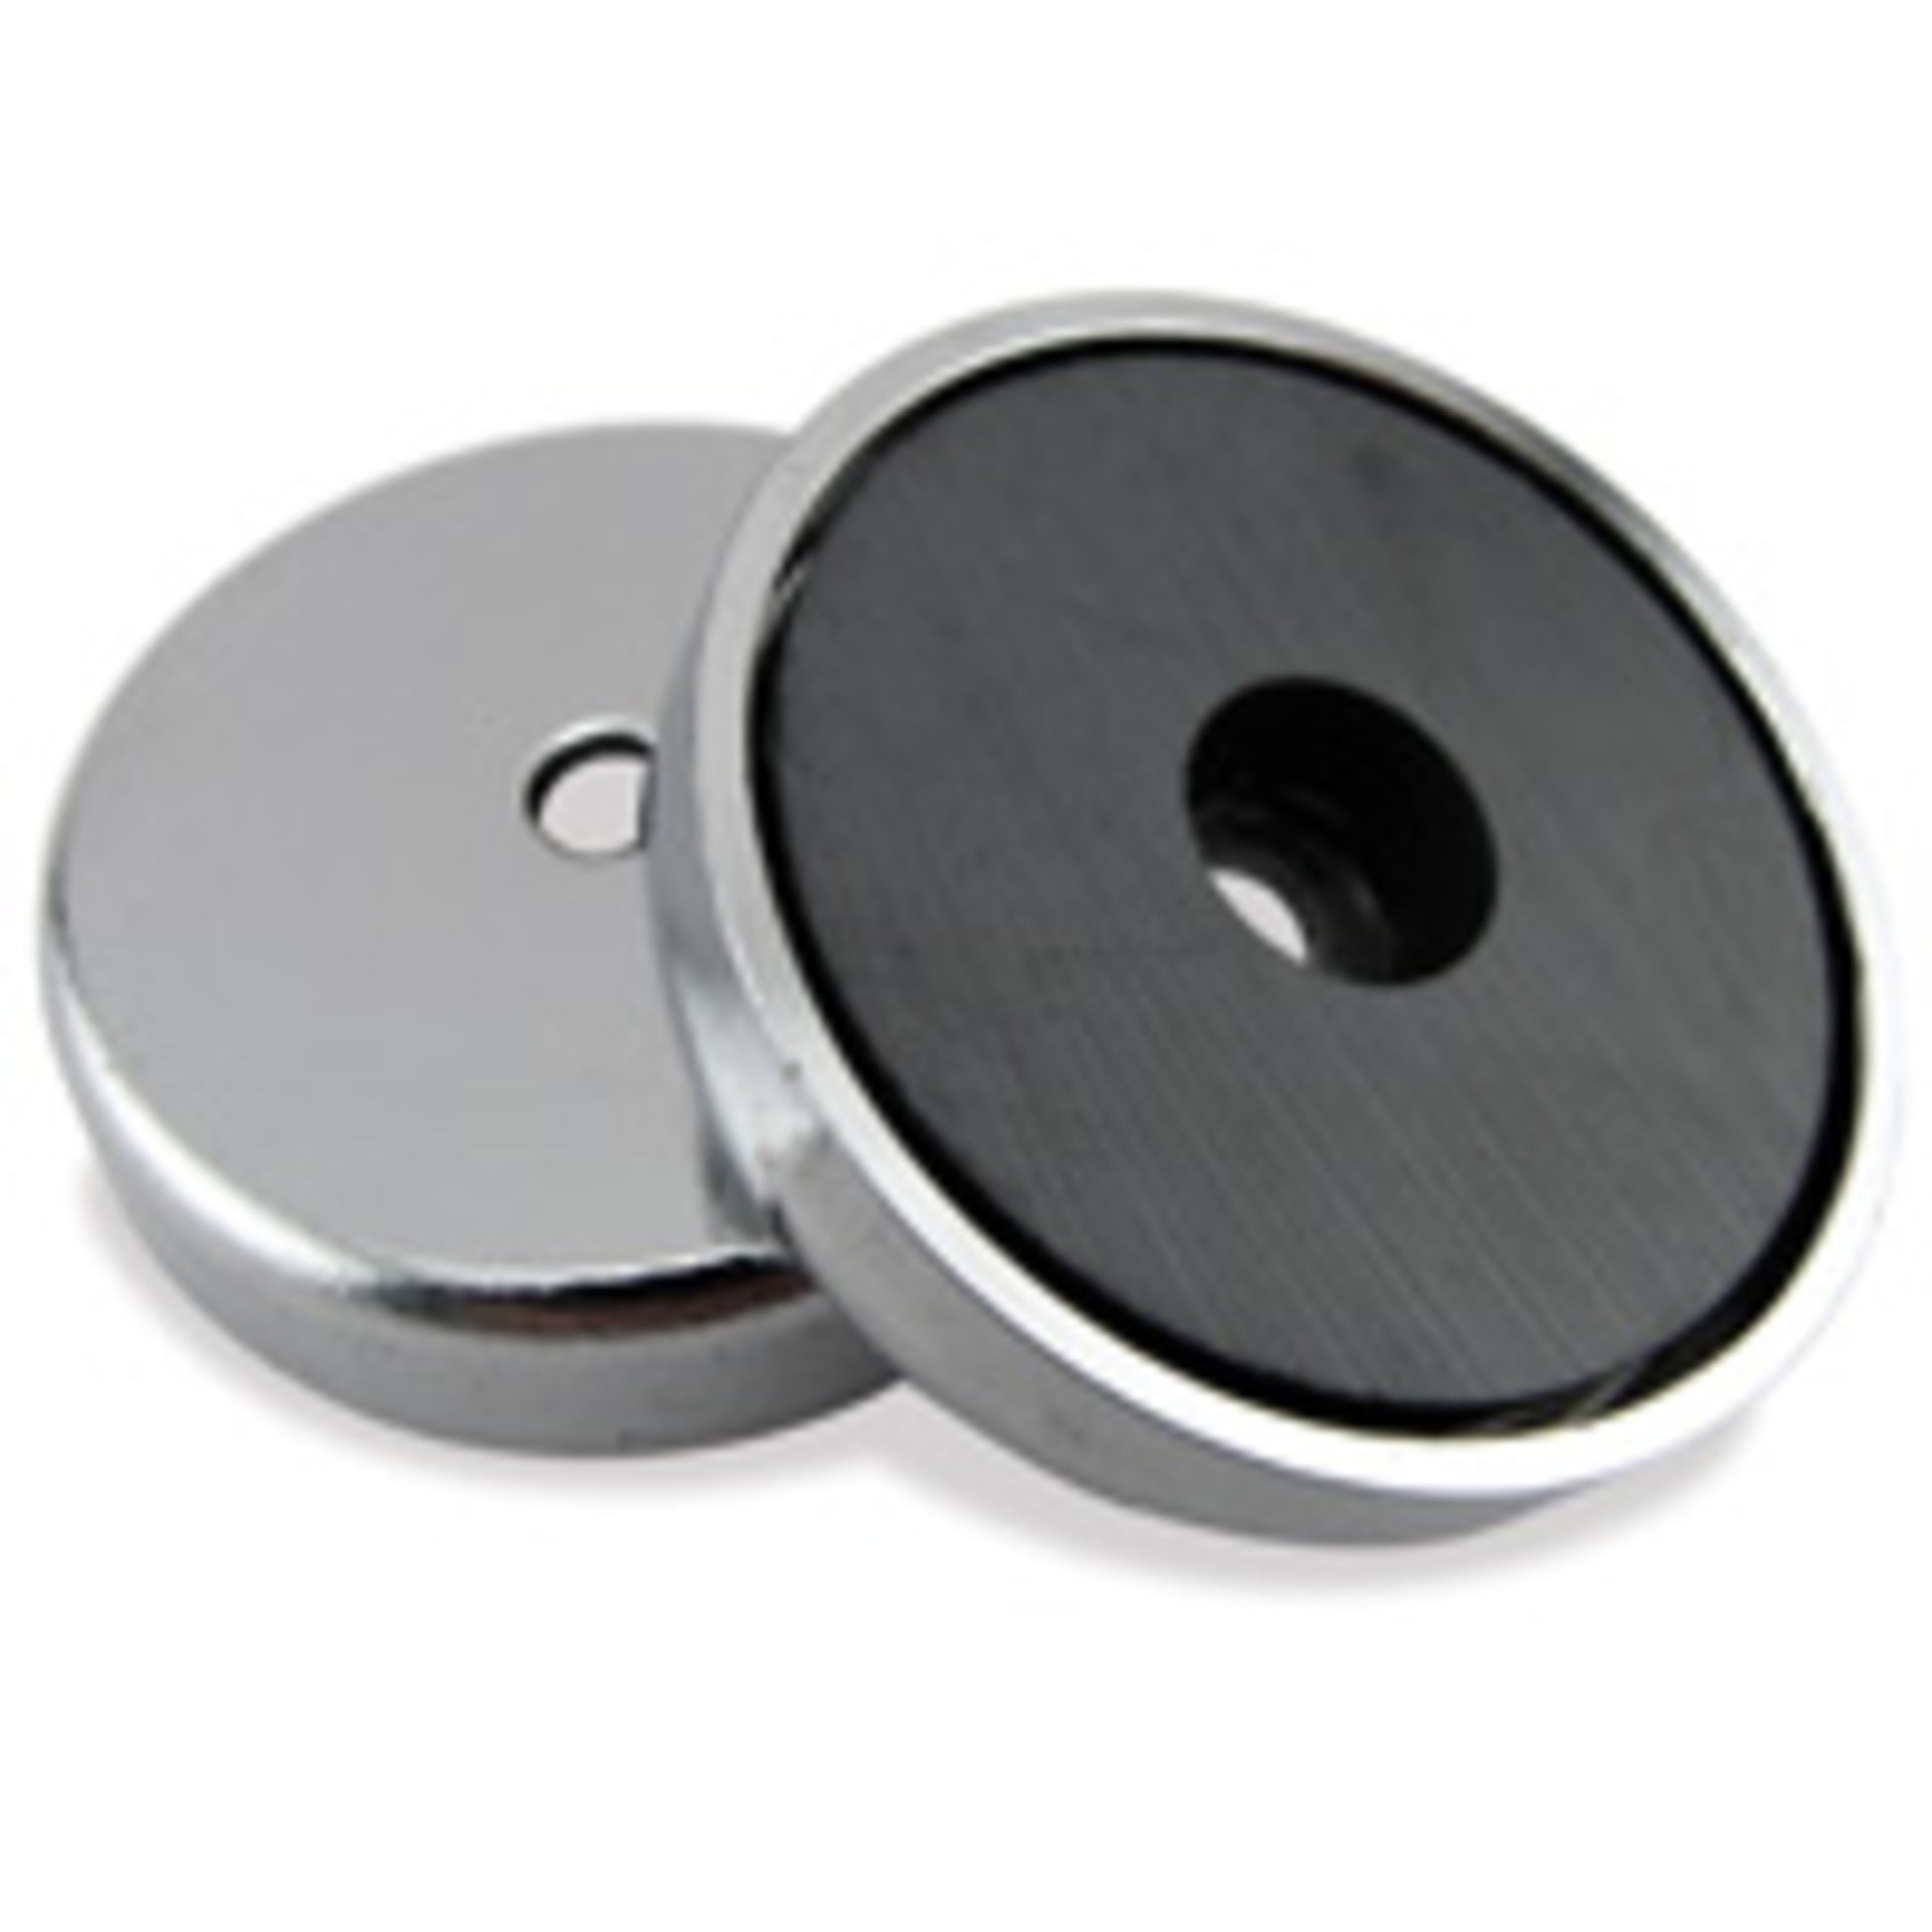 Load image into Gallery viewer, 07217 Ceramic Round Base Magnet - Stacked Bottom and Top View